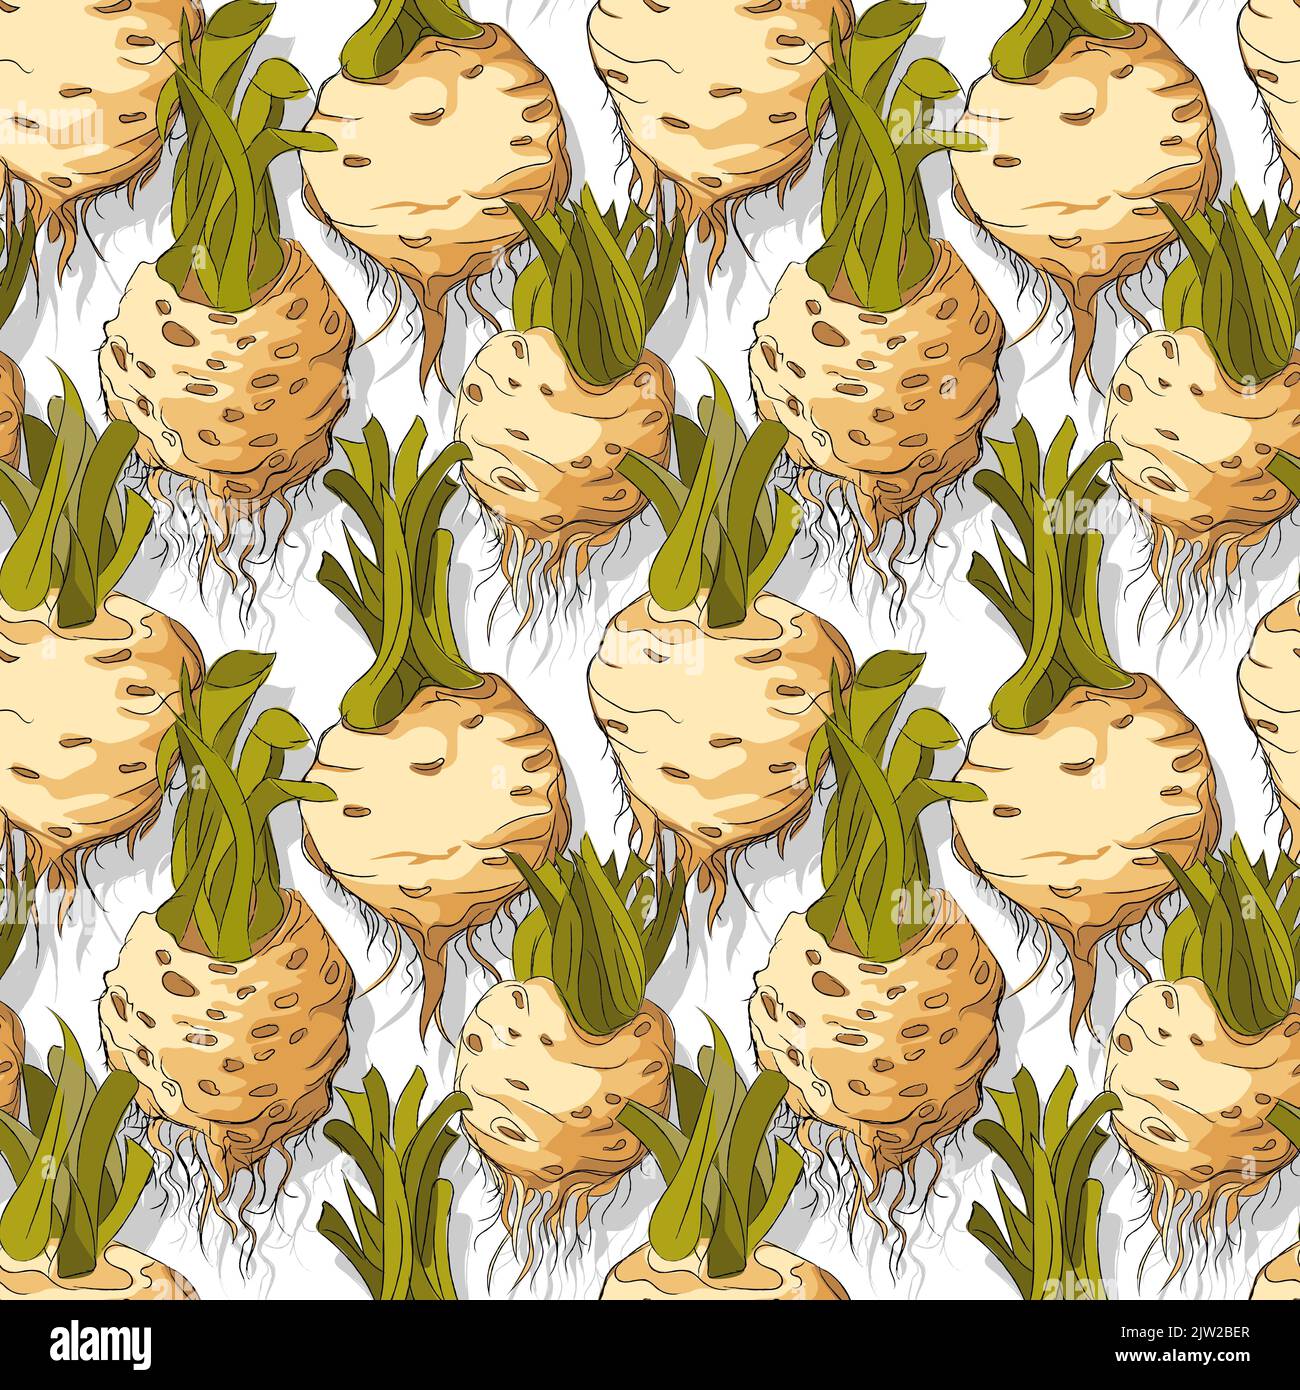 Celery roots repeating pattern, editable vector template Stock Photo